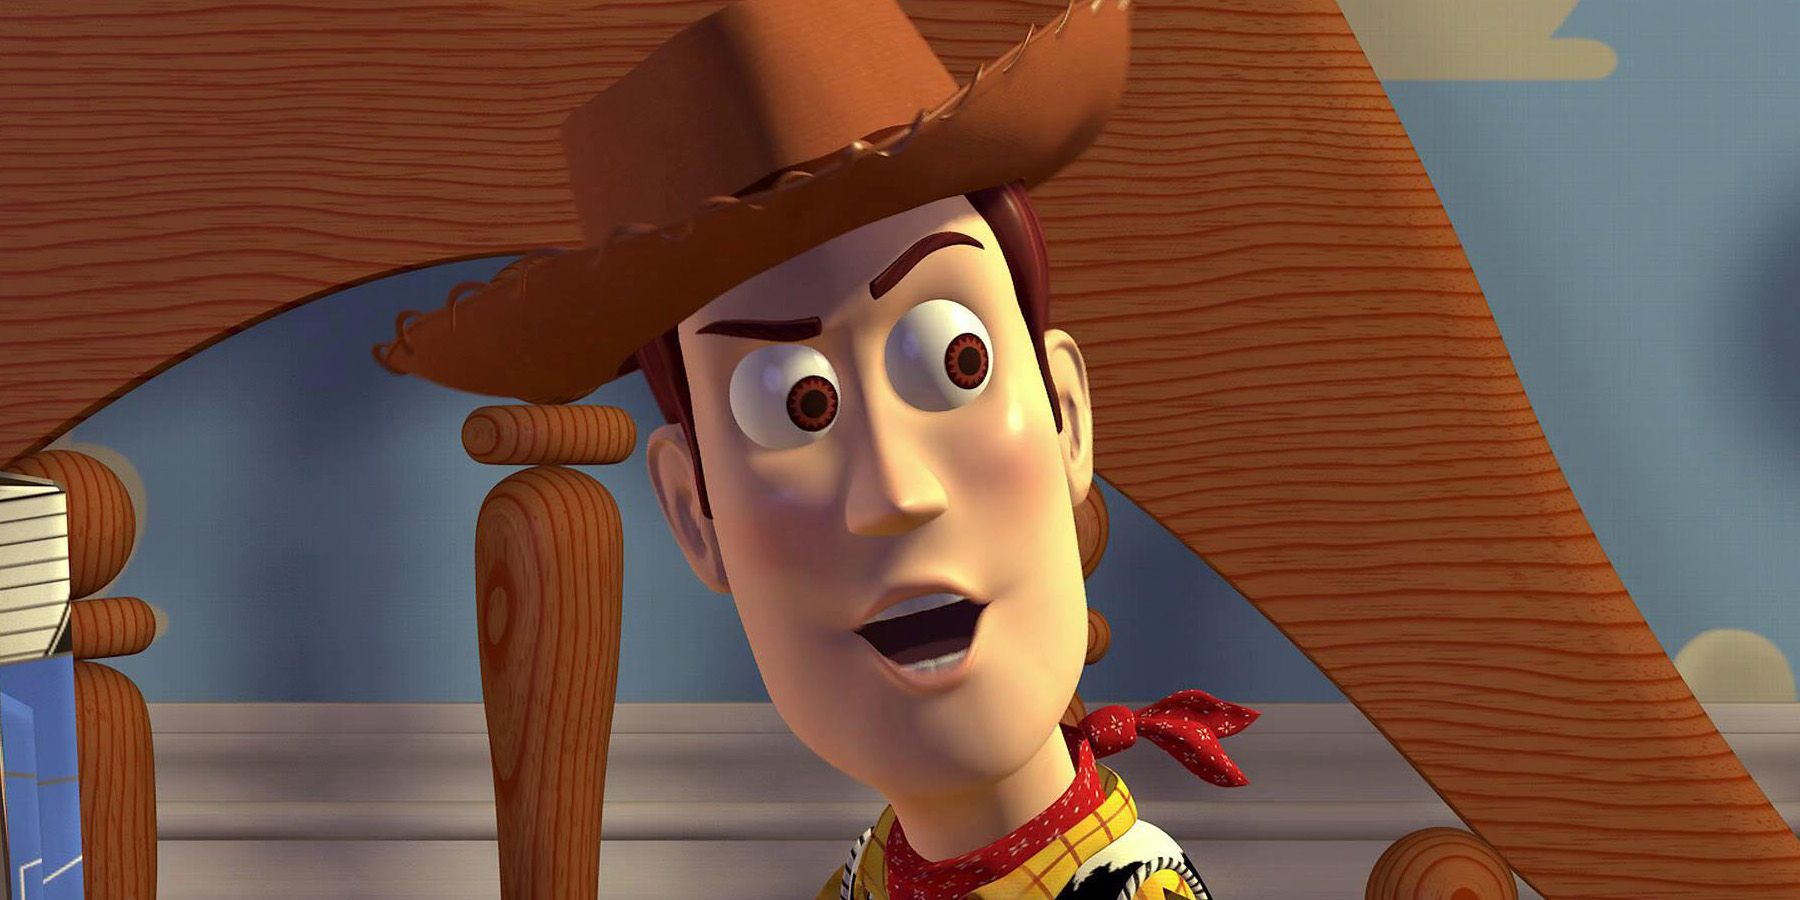 Woody looks angry in andy's room in Toy Story